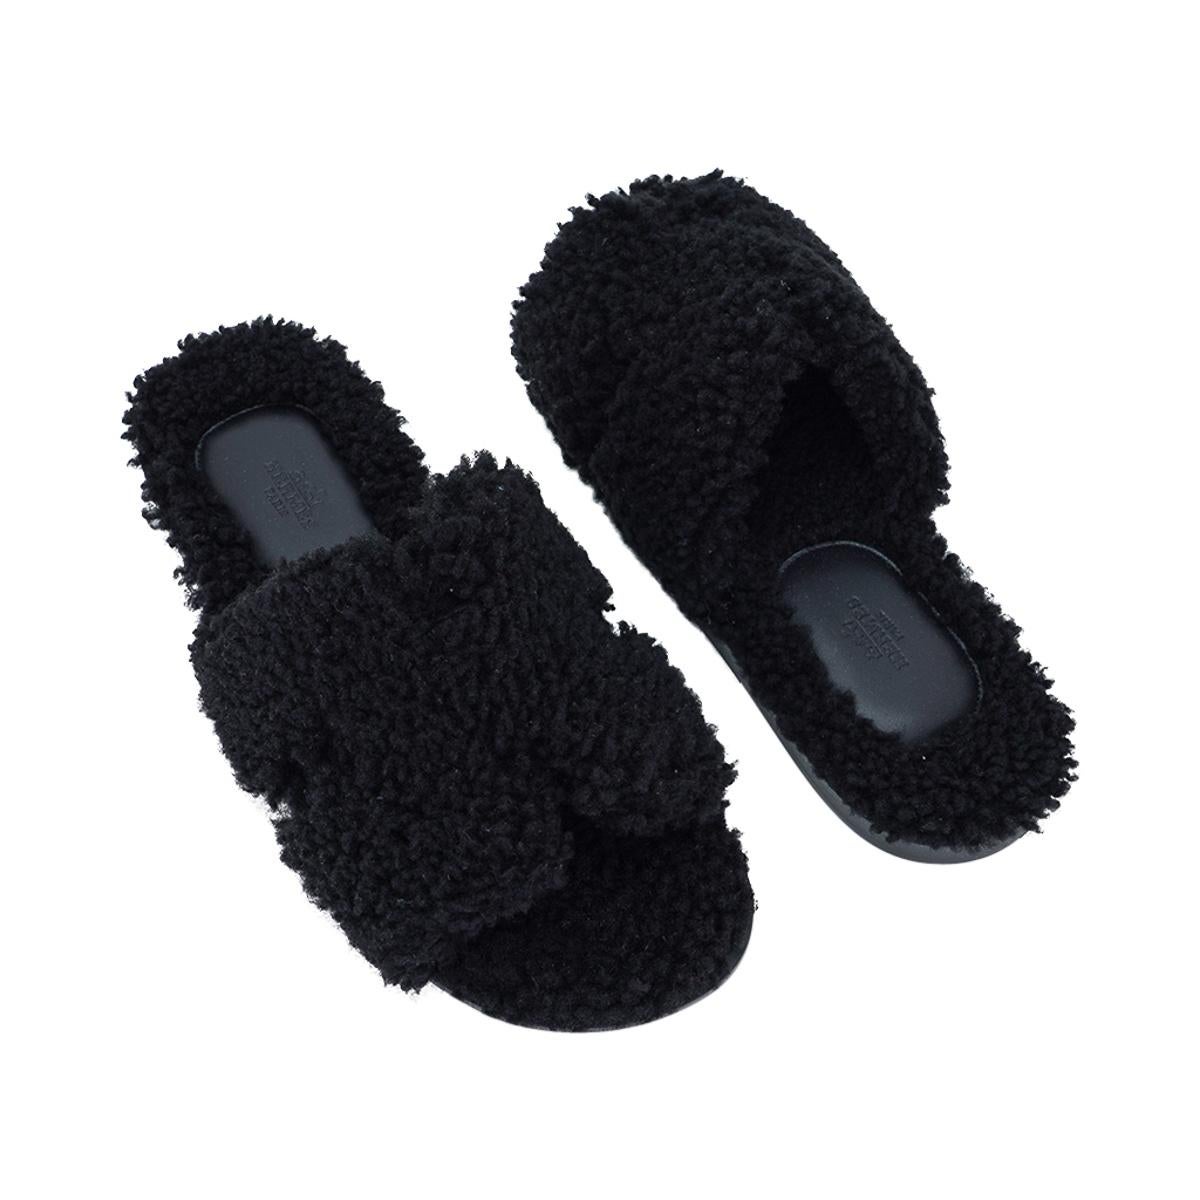 Mightychic offers a pair of Hermes Men's Izmir Shearling sandal featured in Noir.
The iconic H cutout over the top of the foot in Shearling.
Insole is Black leather with Black Shearling trim. 
Sophisticated in a silhouette that works for every